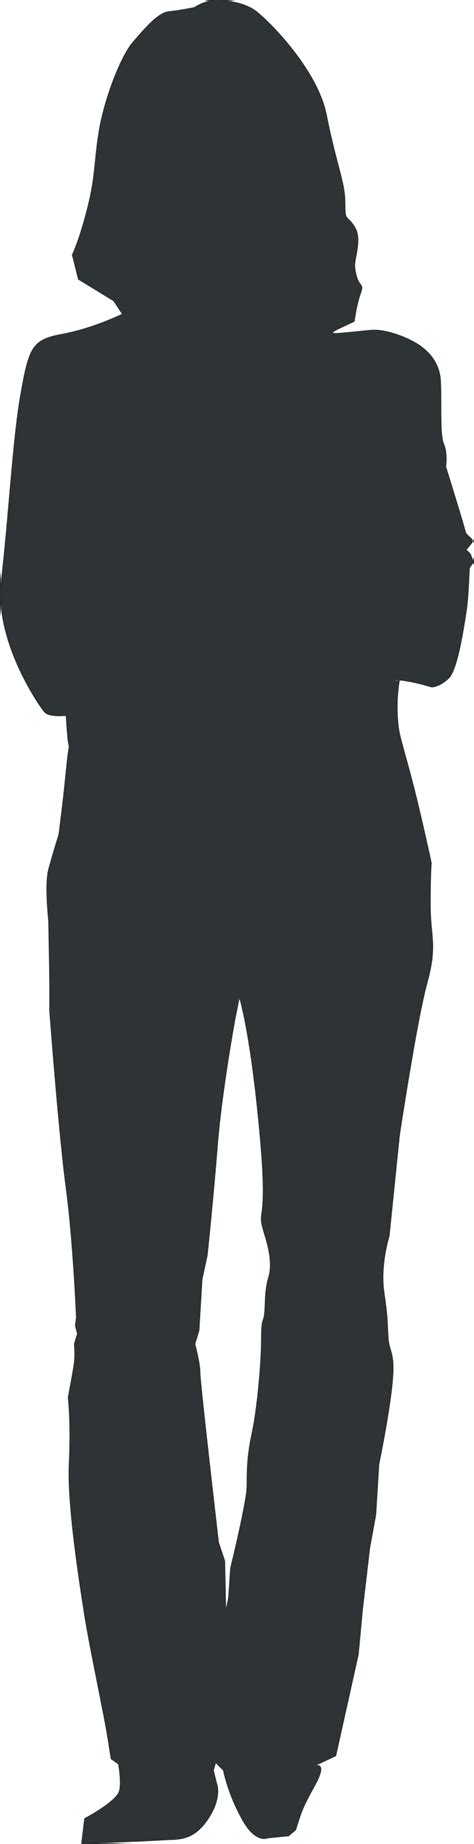 Person Outline Template Clipart Best